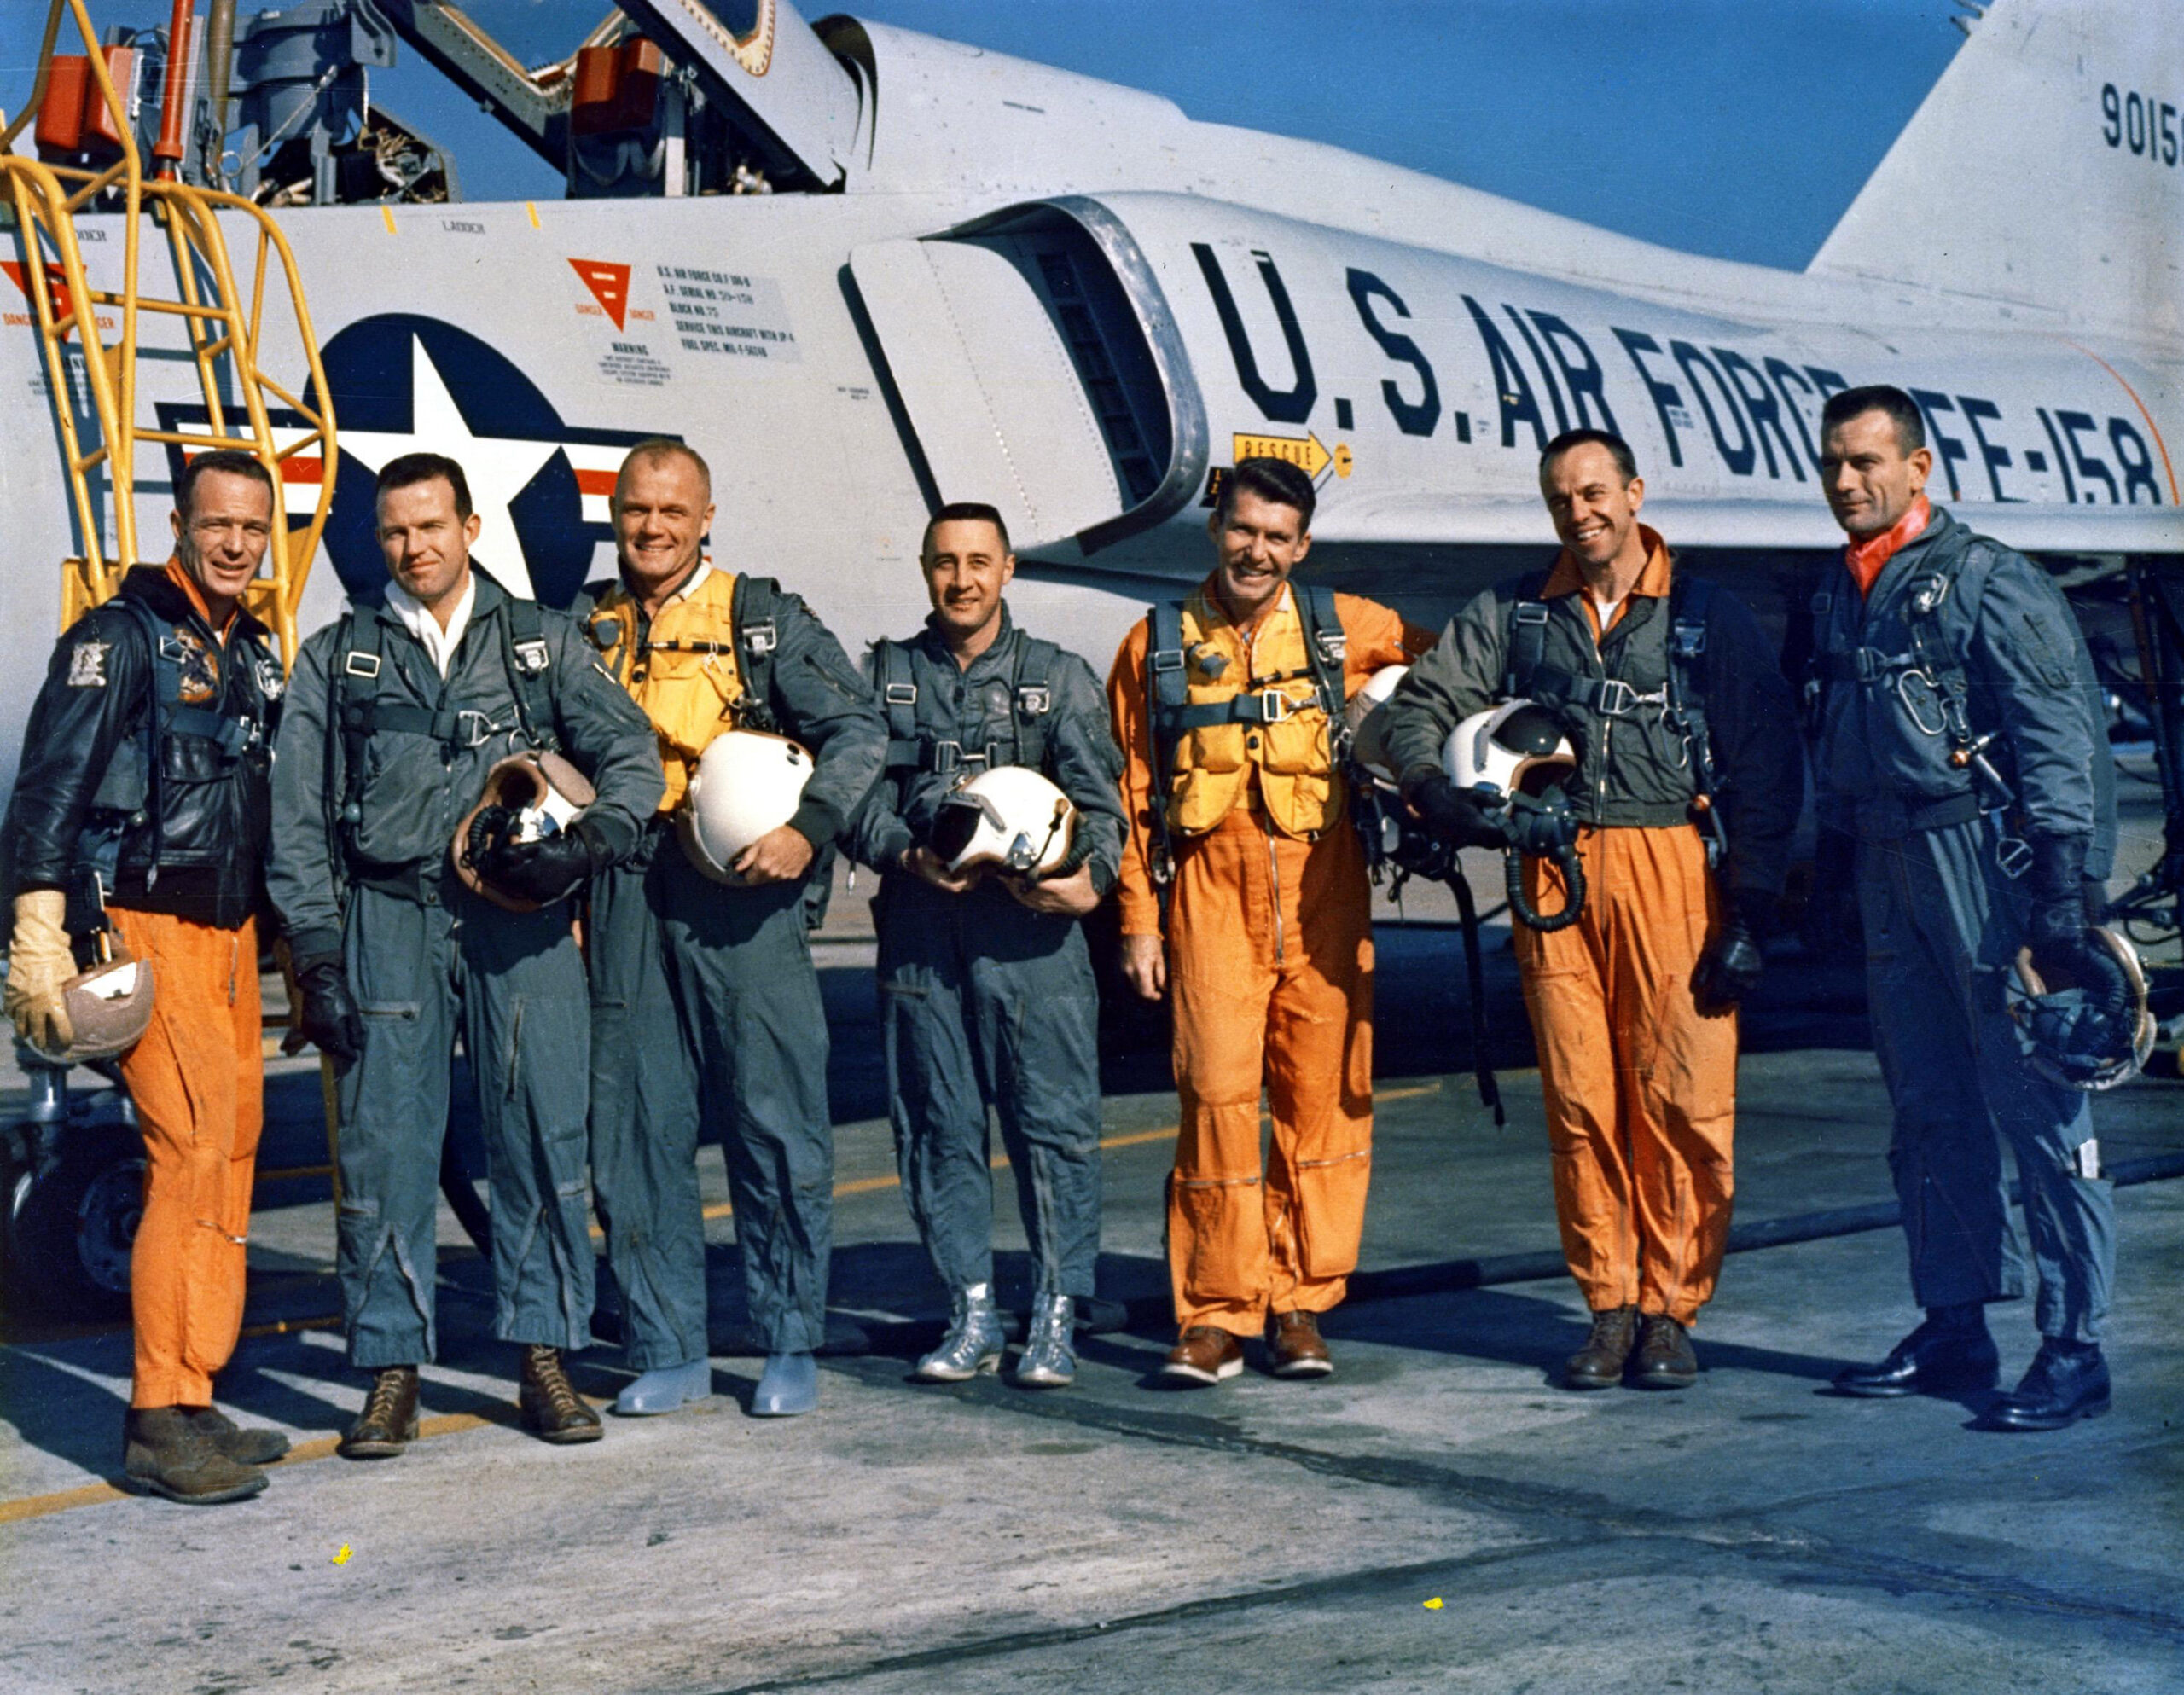 National Aeronautics and Space Administration (NASA) group portrait of the 'Original Seven' astronauts from the Mercury program as they pose in front of an Air Force jet, Florida, January 1963. From left, Scott Carpenter, Gordon Cooper (1927 - 2004), John Glenn, Gus Grissom (1926 - 1967), Wally Schirra (1923 - 2007), Alan Shepherd (1923 - 1998), and Deke Slayton (1924 - 1993). (Photo by NASA/Interim Archives/Getty Images)